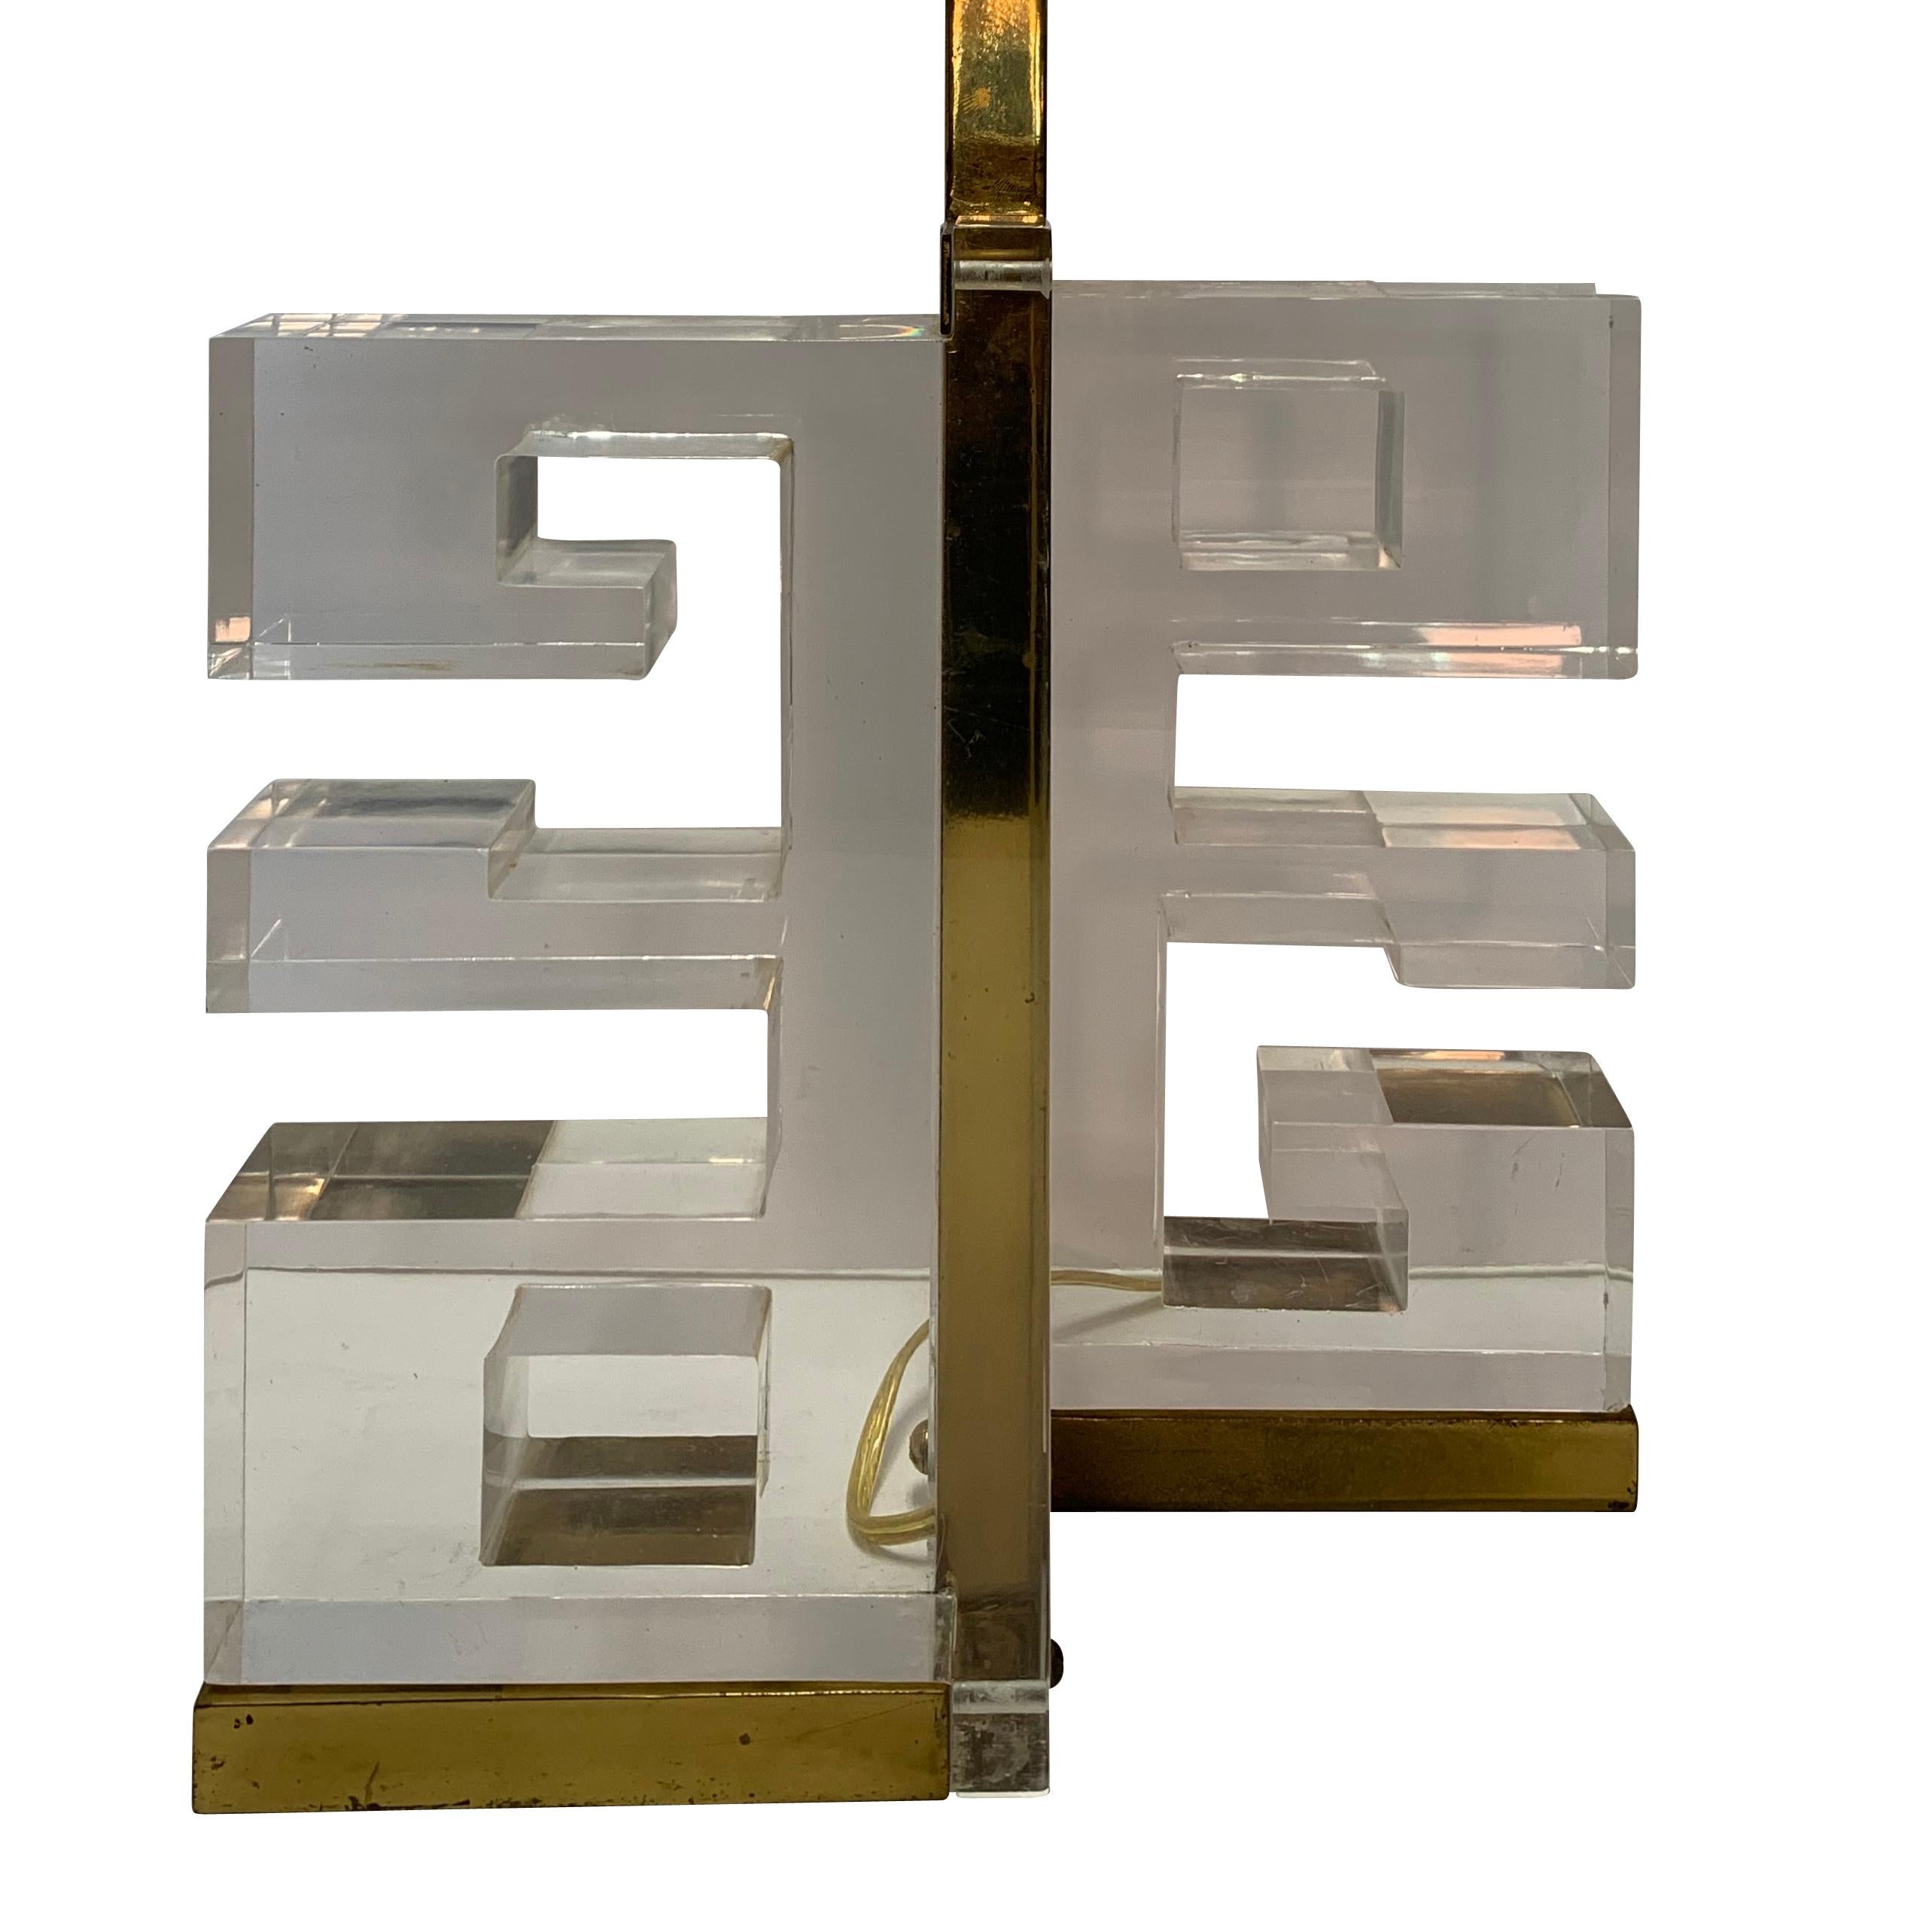 1950s Italian pair of Lucite and brass Greek key design lamps
Base measures: 11